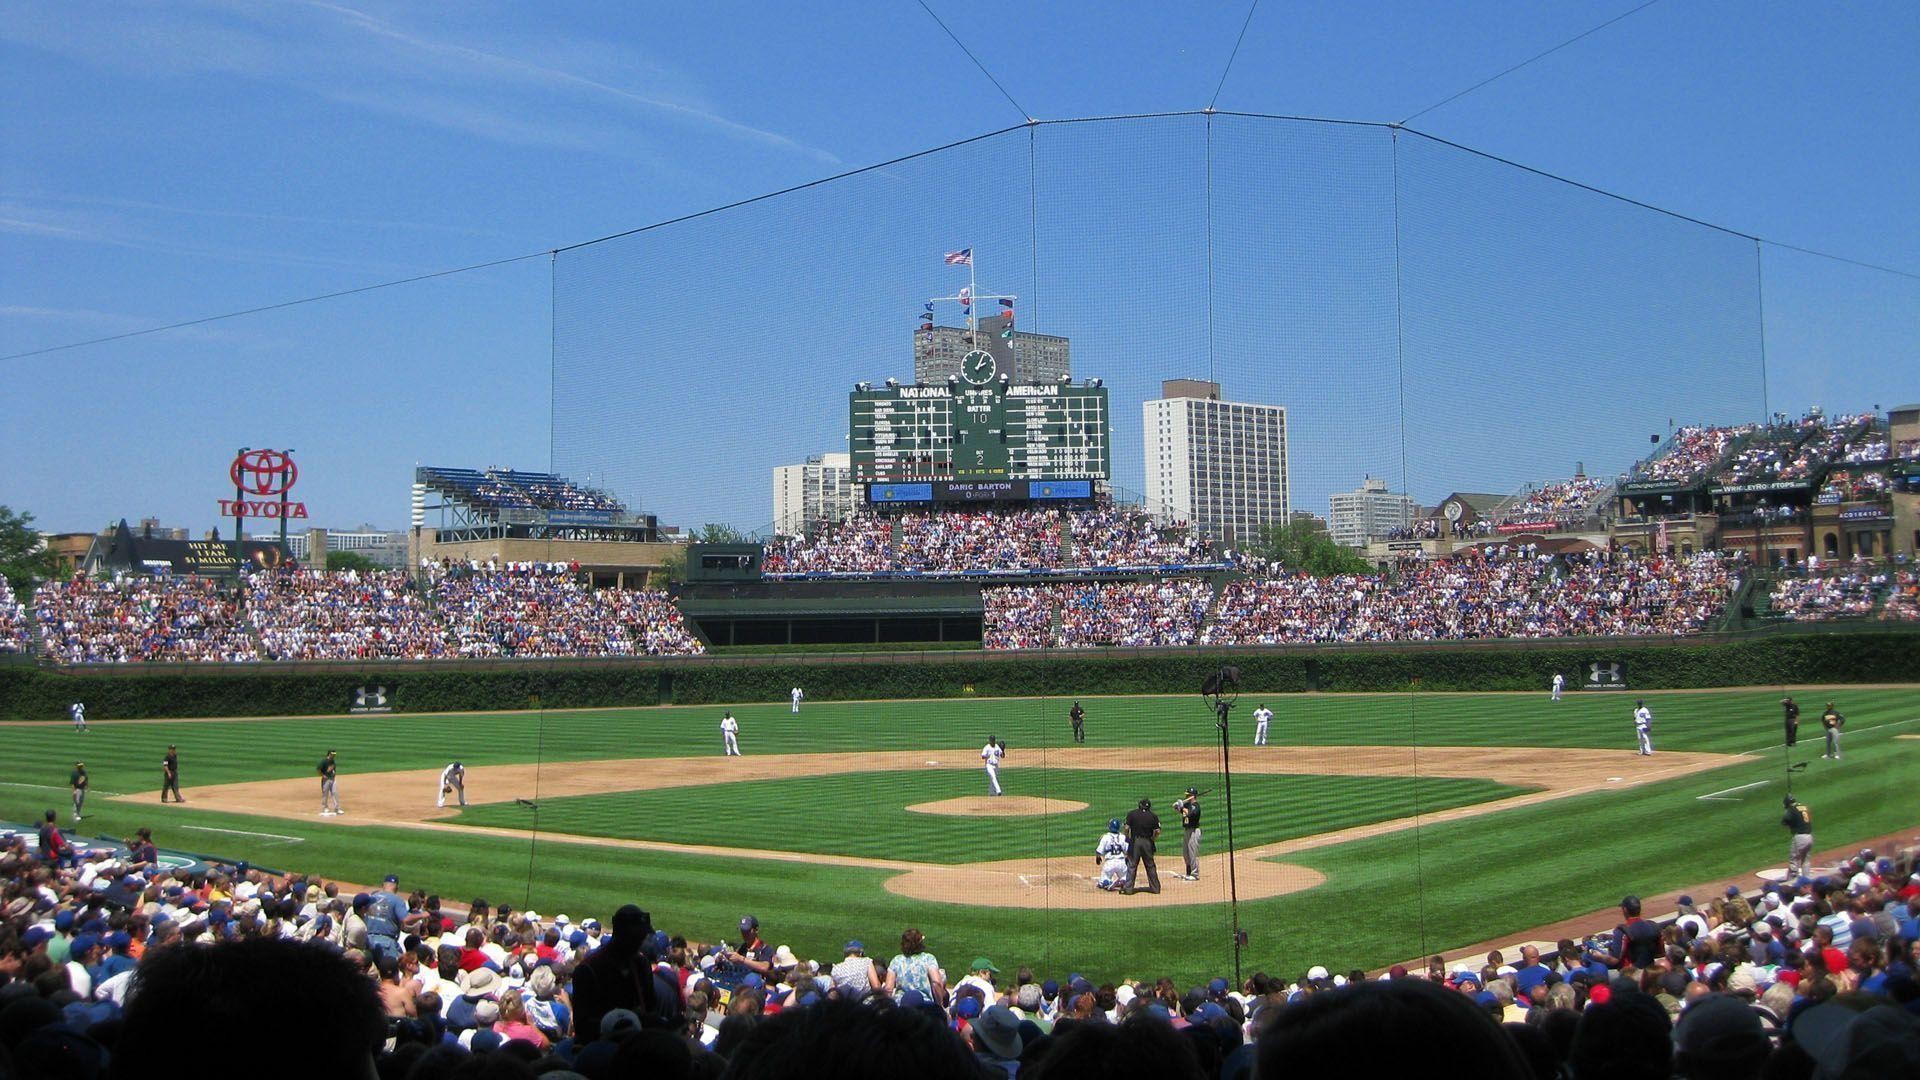 1920x1080 Chicago Cubs wallpapers | Chicago Cubs background - Page 6